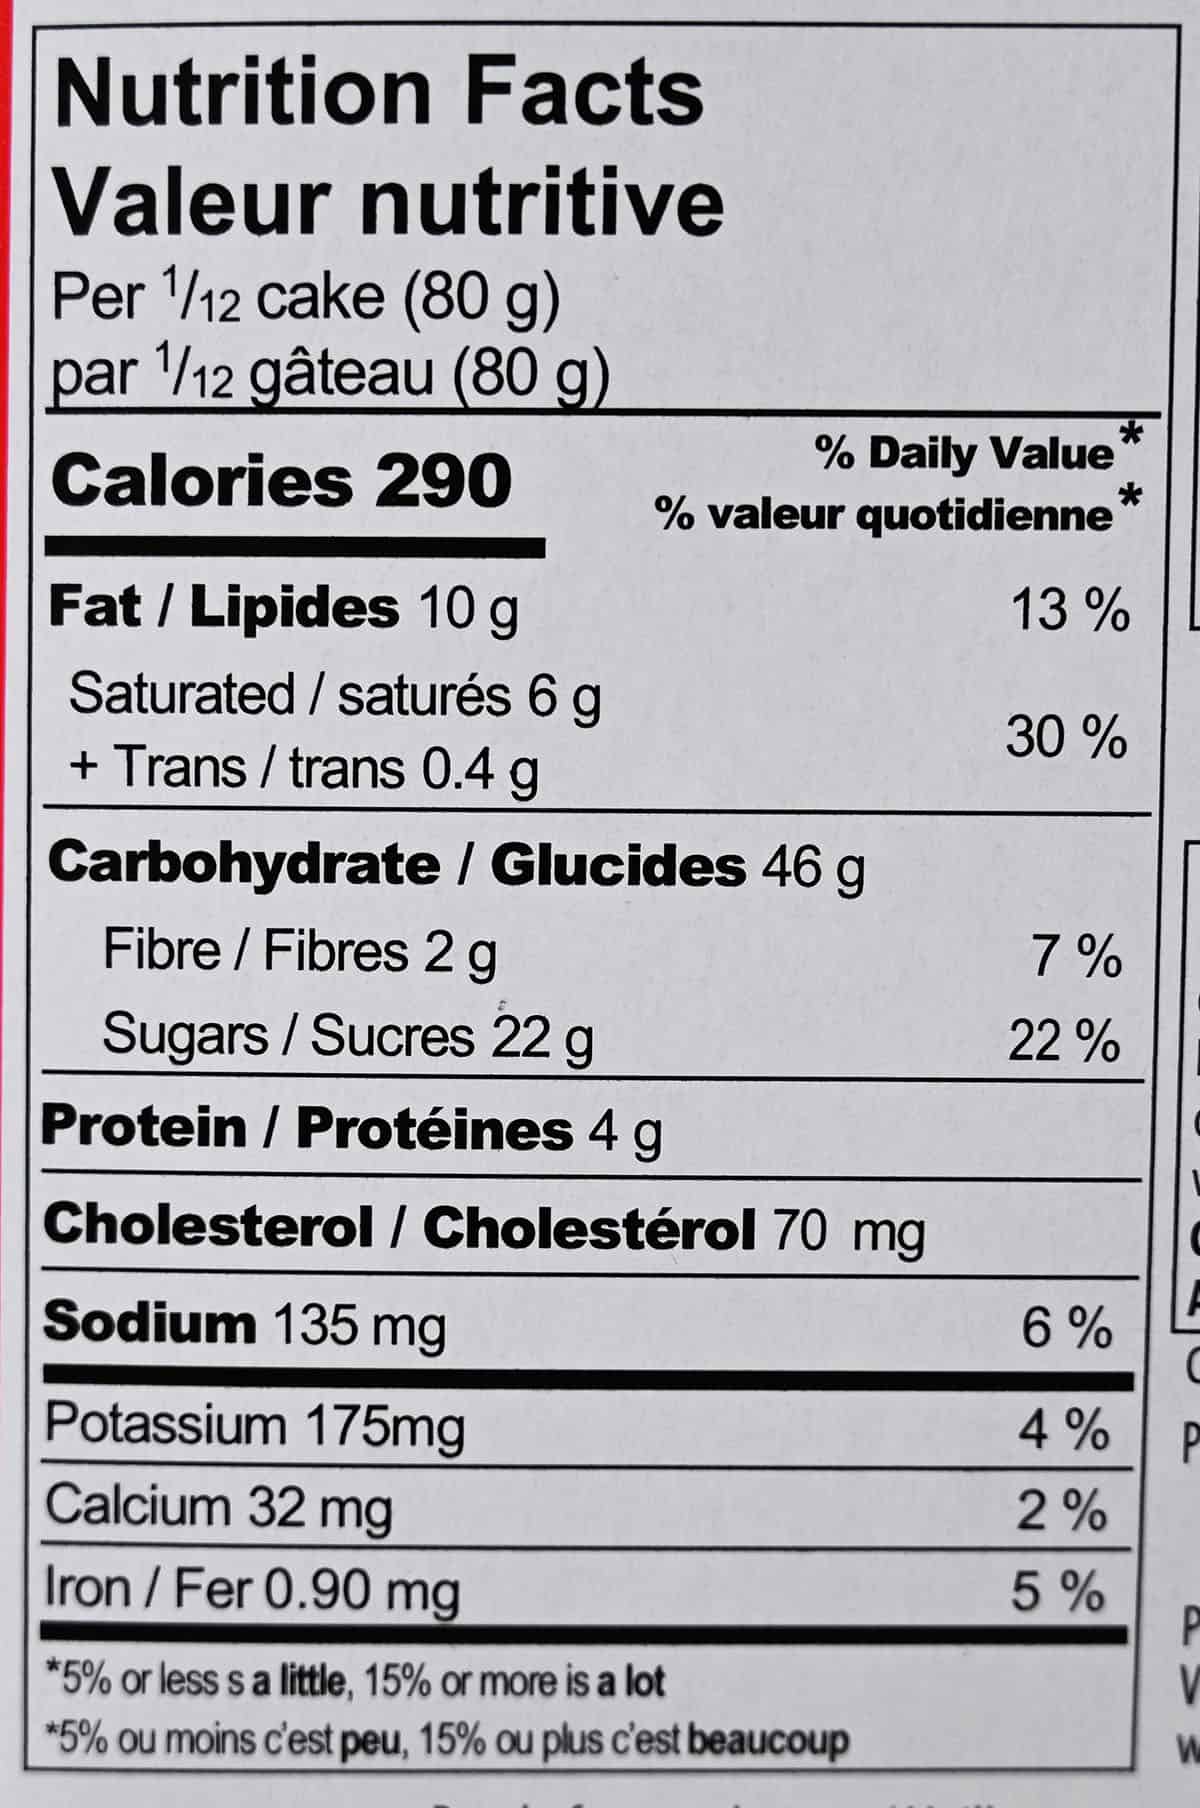 Image of the panettone nutrition facts from the box.